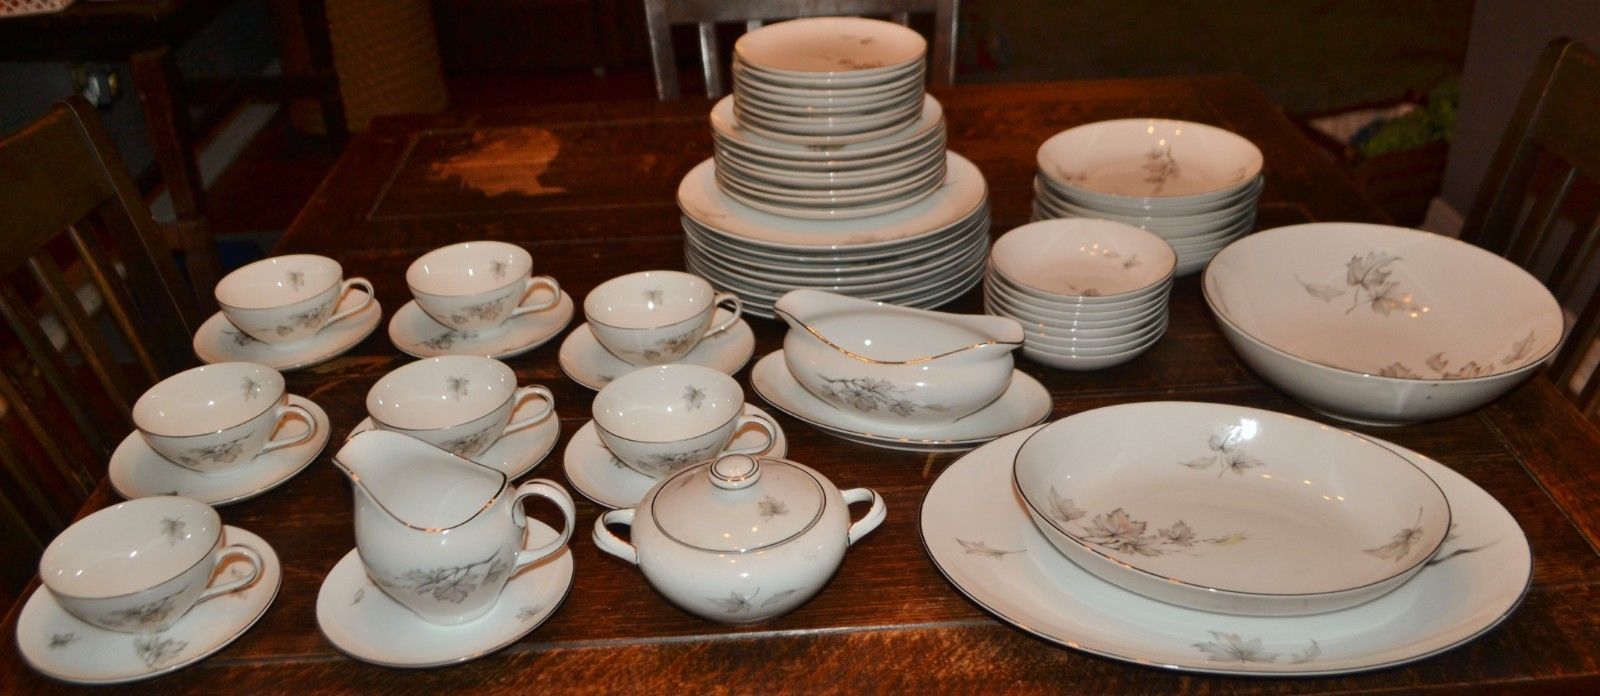 53 Piece Sone China Made in Japan 1832 Dish Set - Maple Leaf, White with Silver